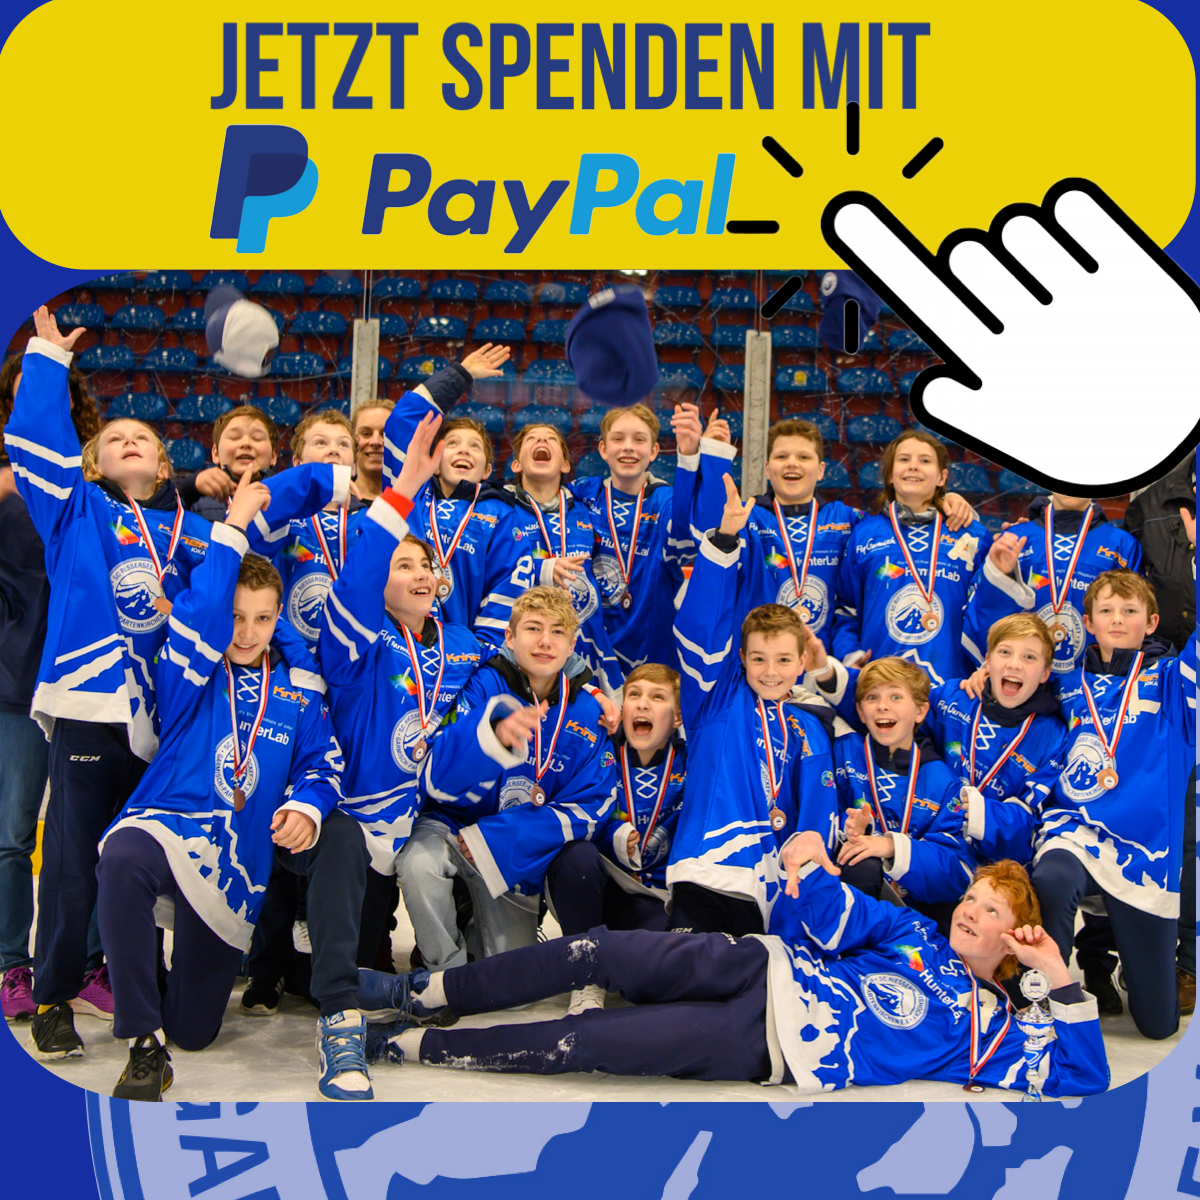 Paypal Spende1